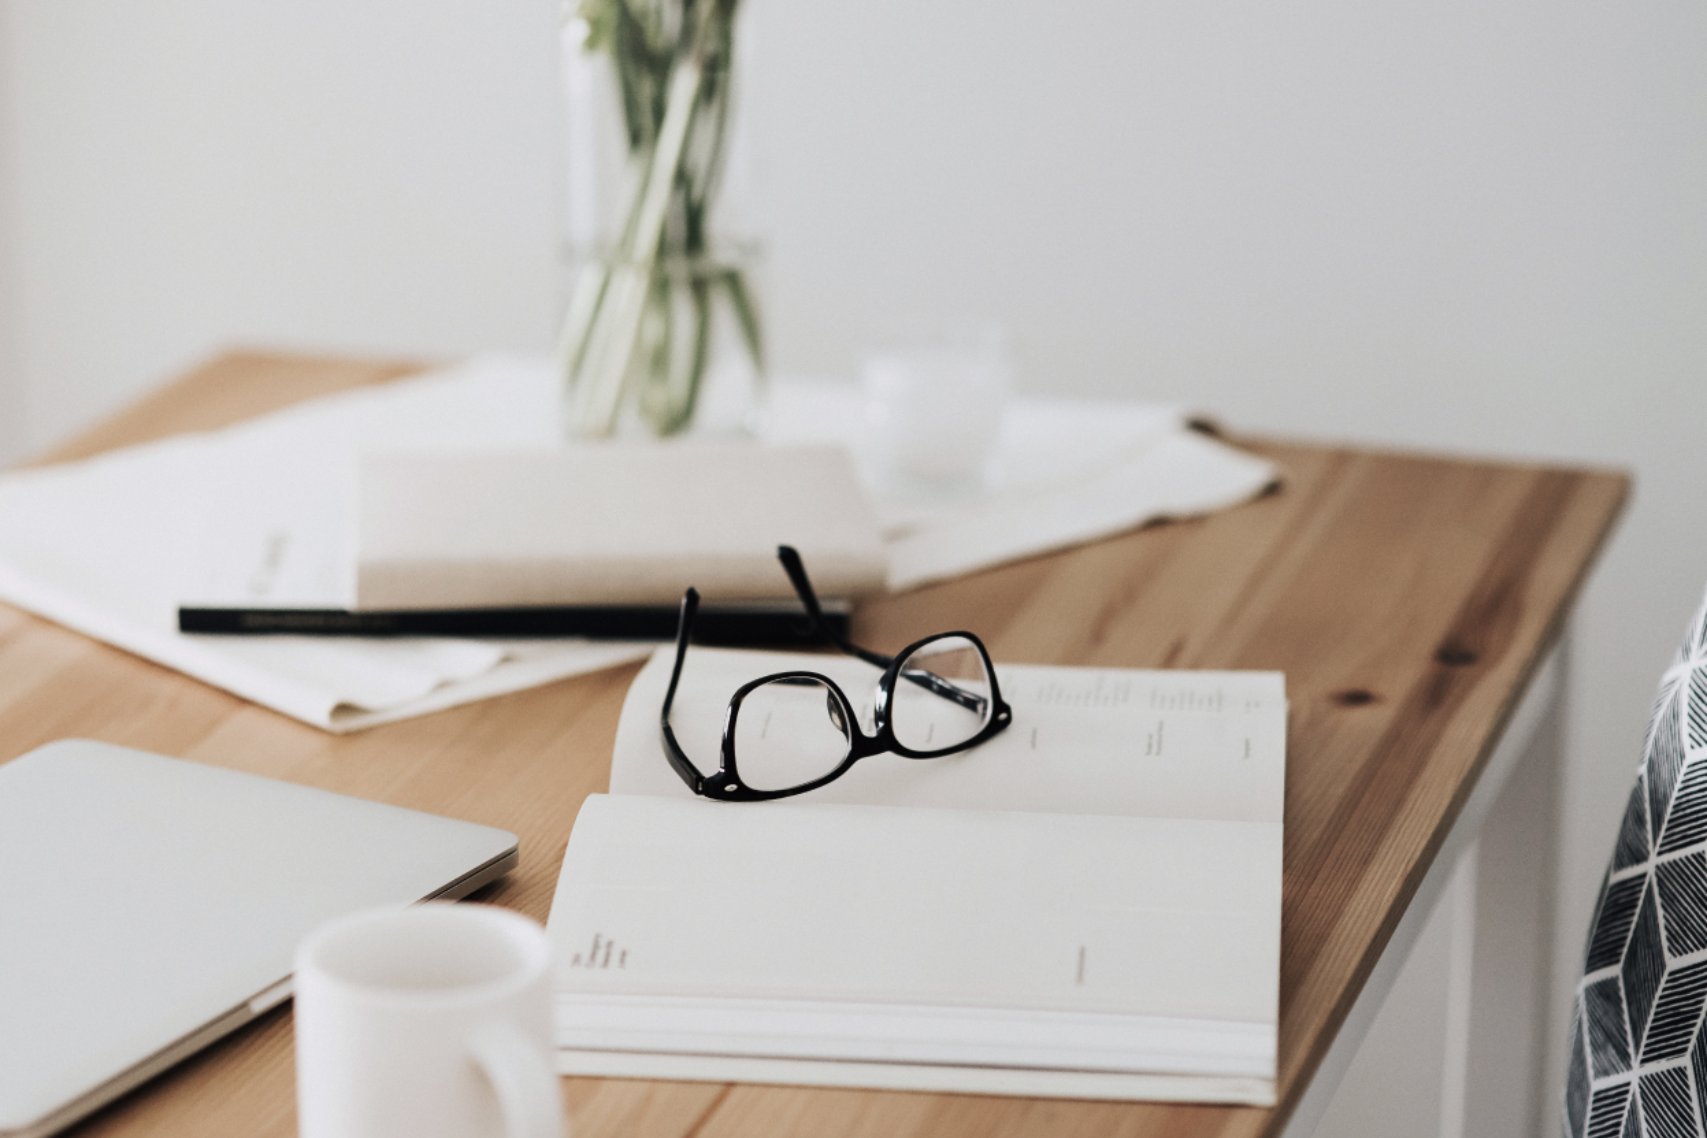 Notebook and glasses on table